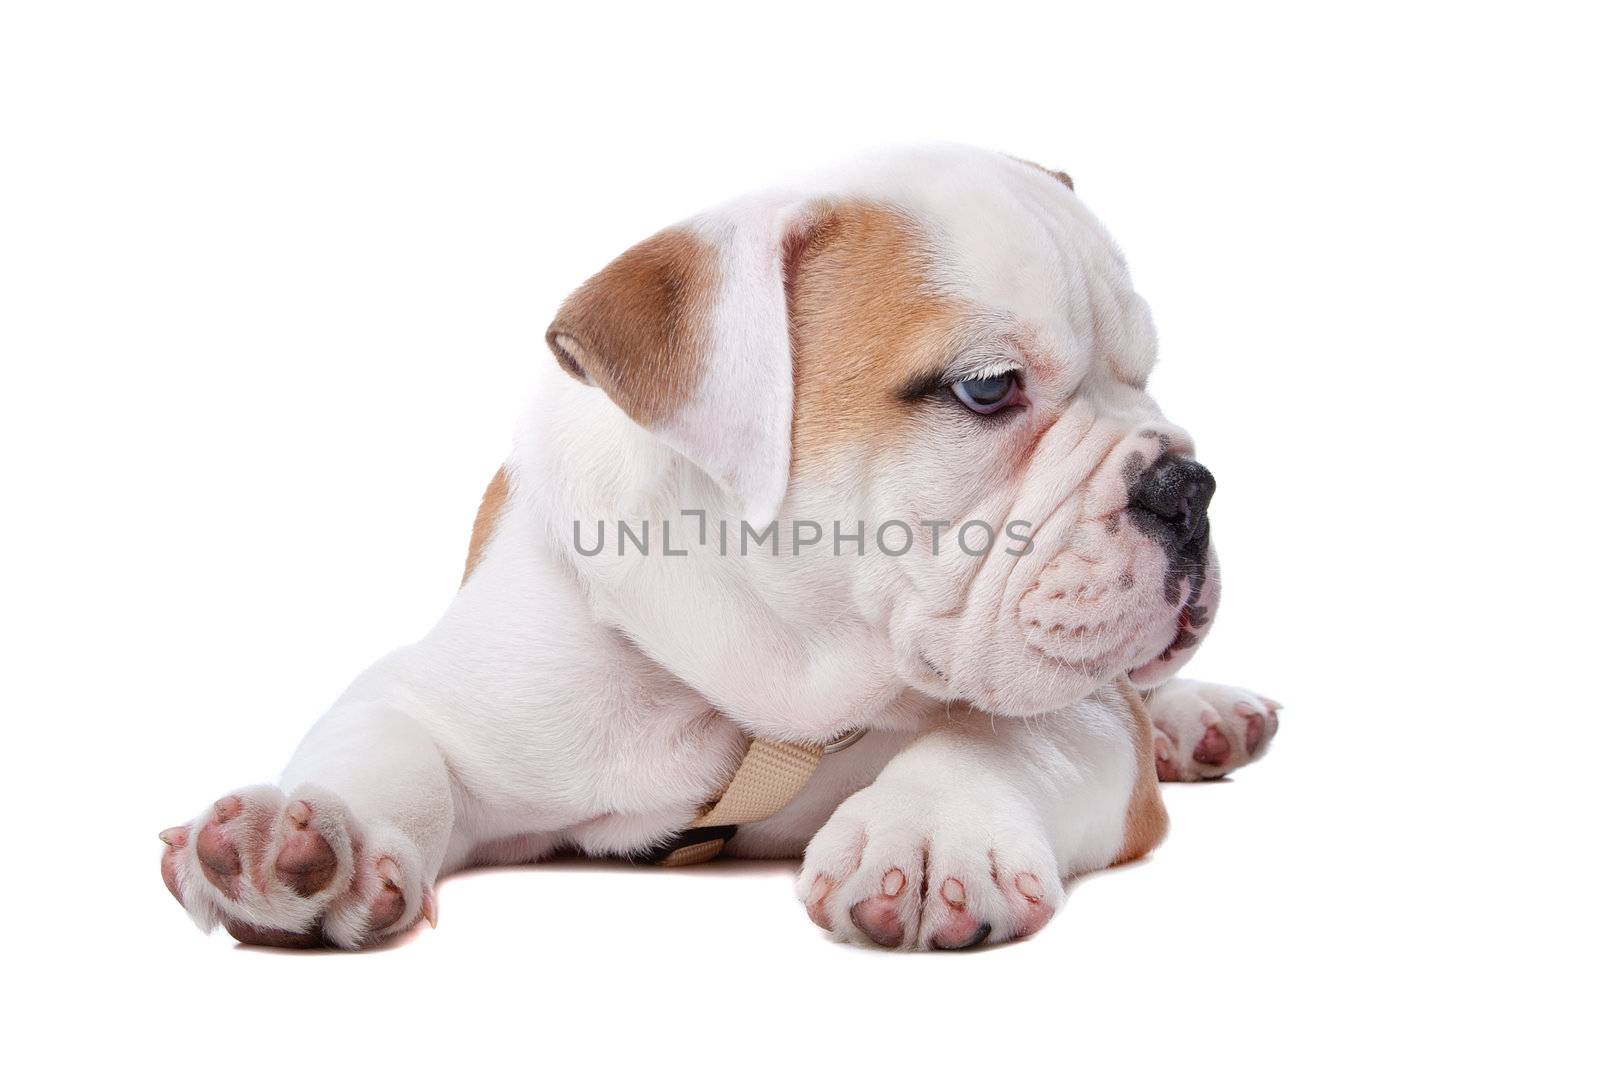 English Bulldog puppy lying down in front of white background